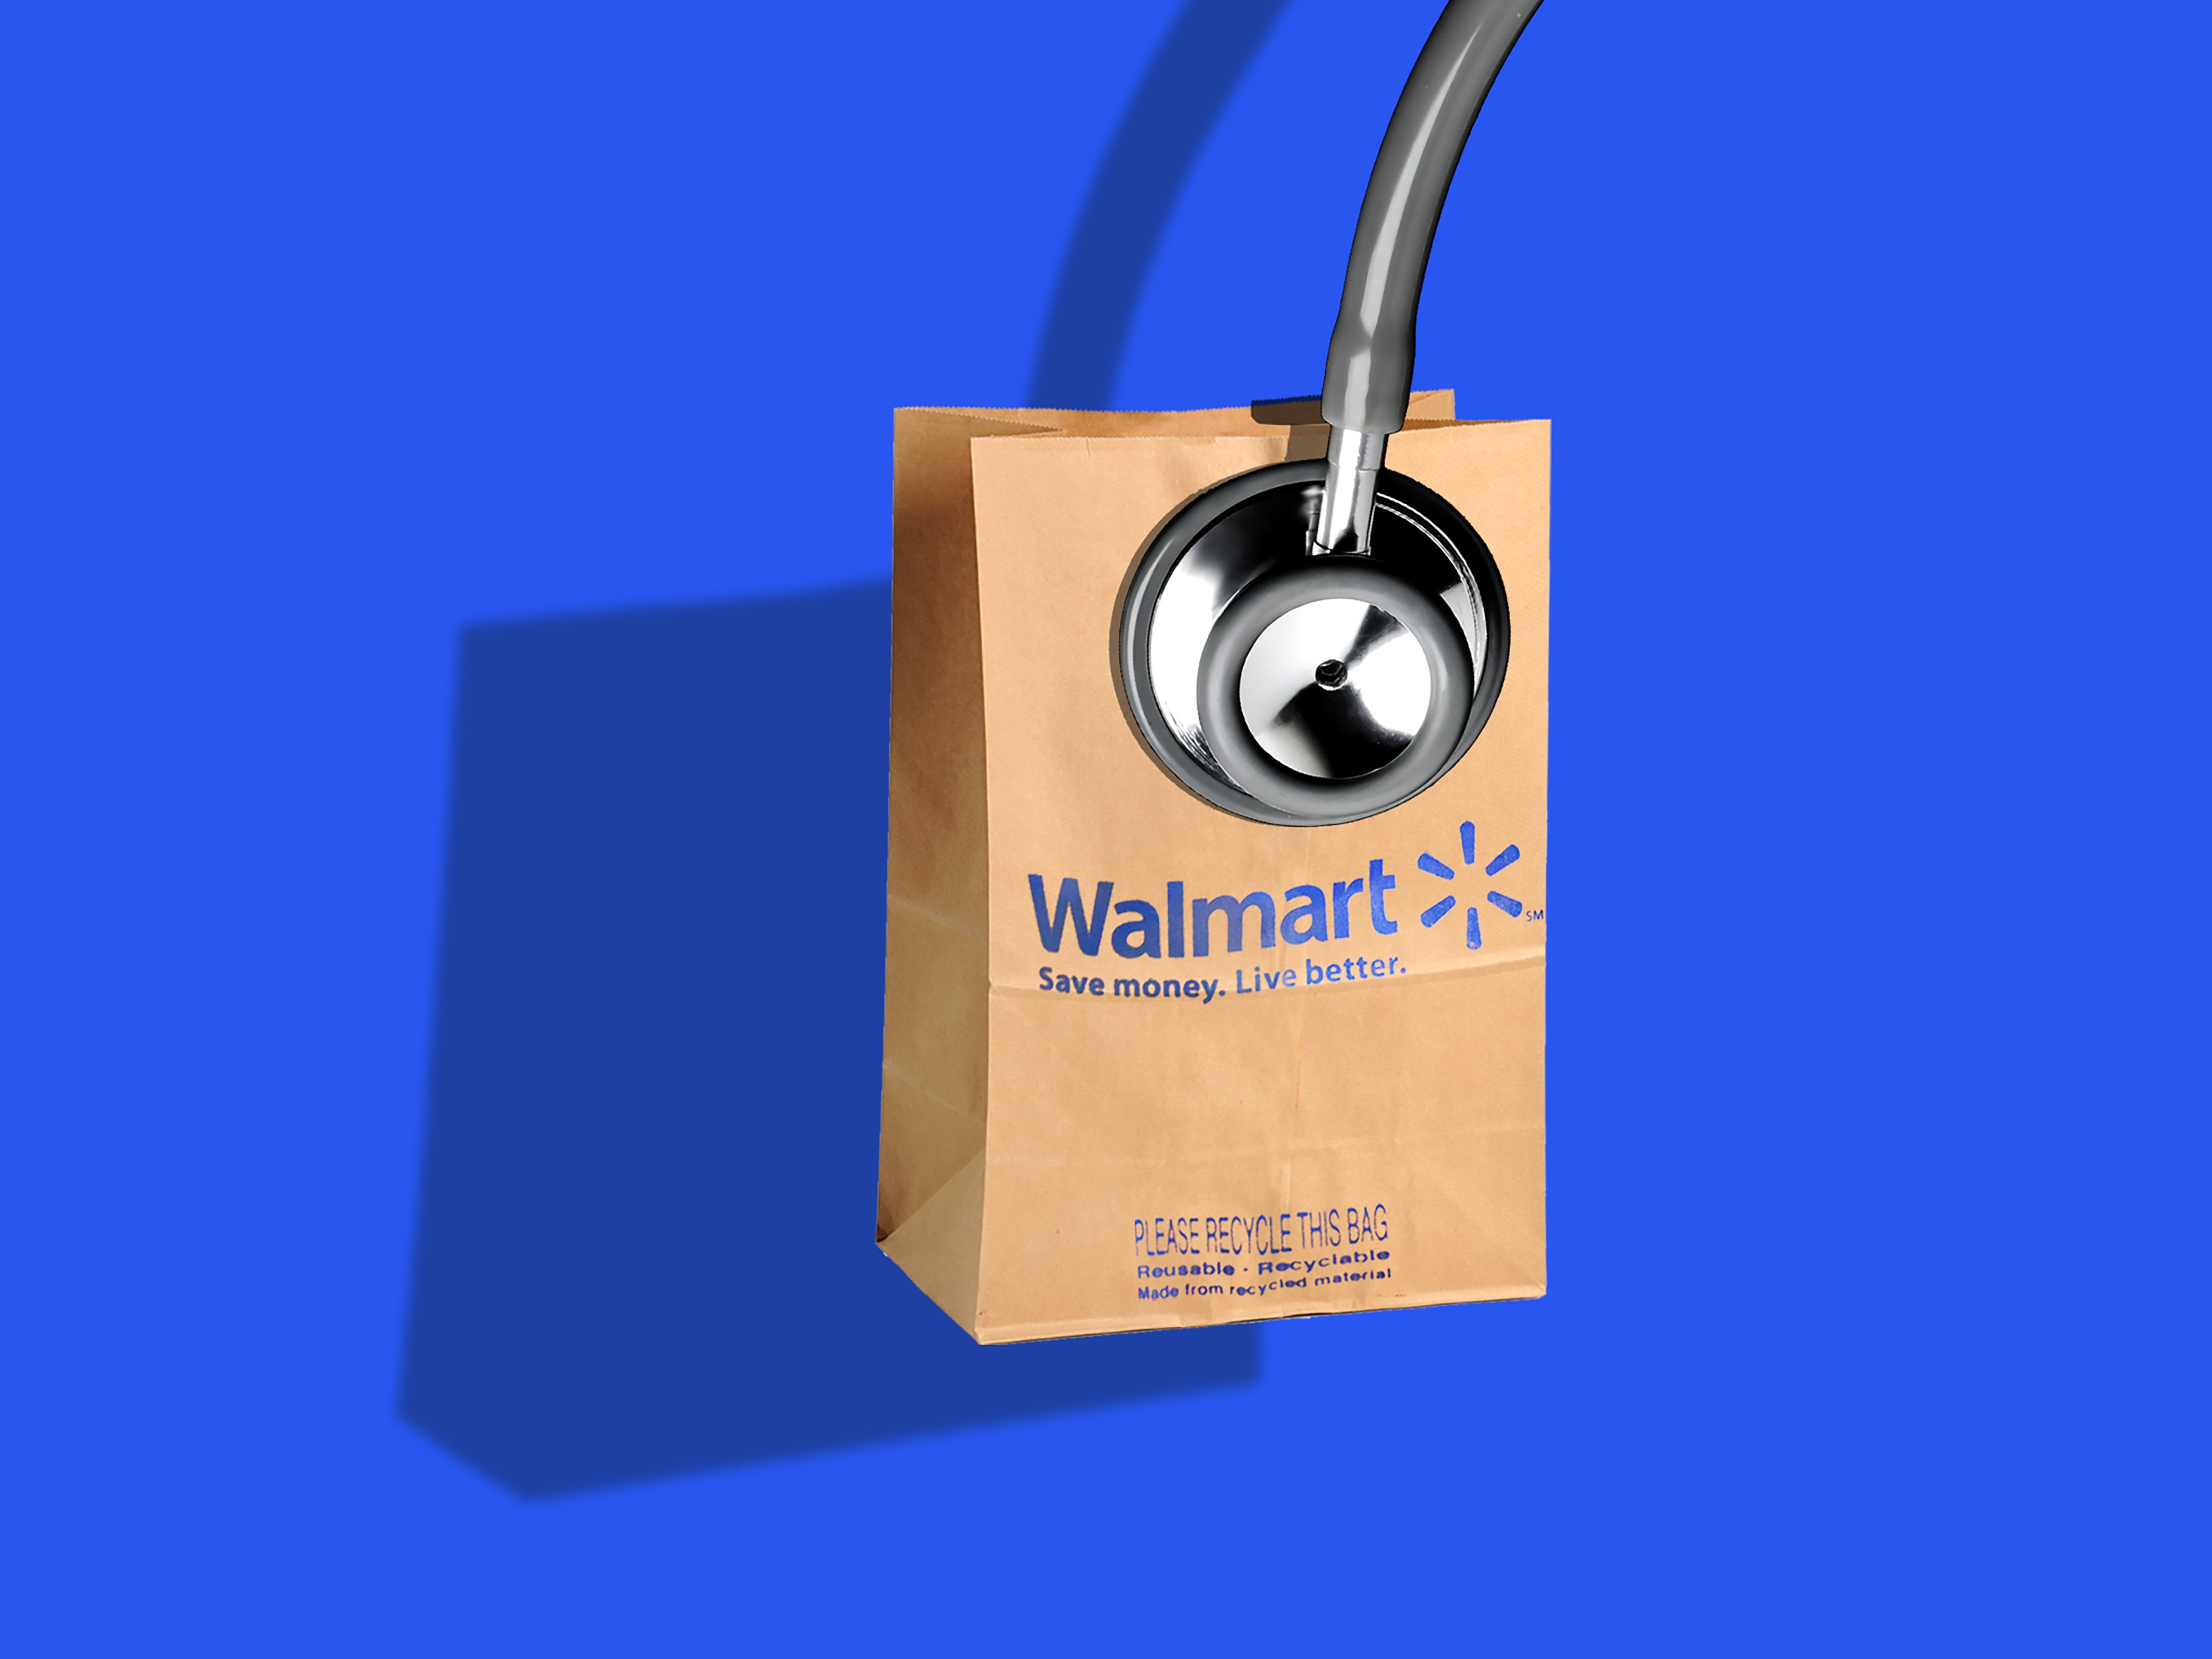 Walmart Wants to Bring Its 'Everyday Low Prices' to Health ...